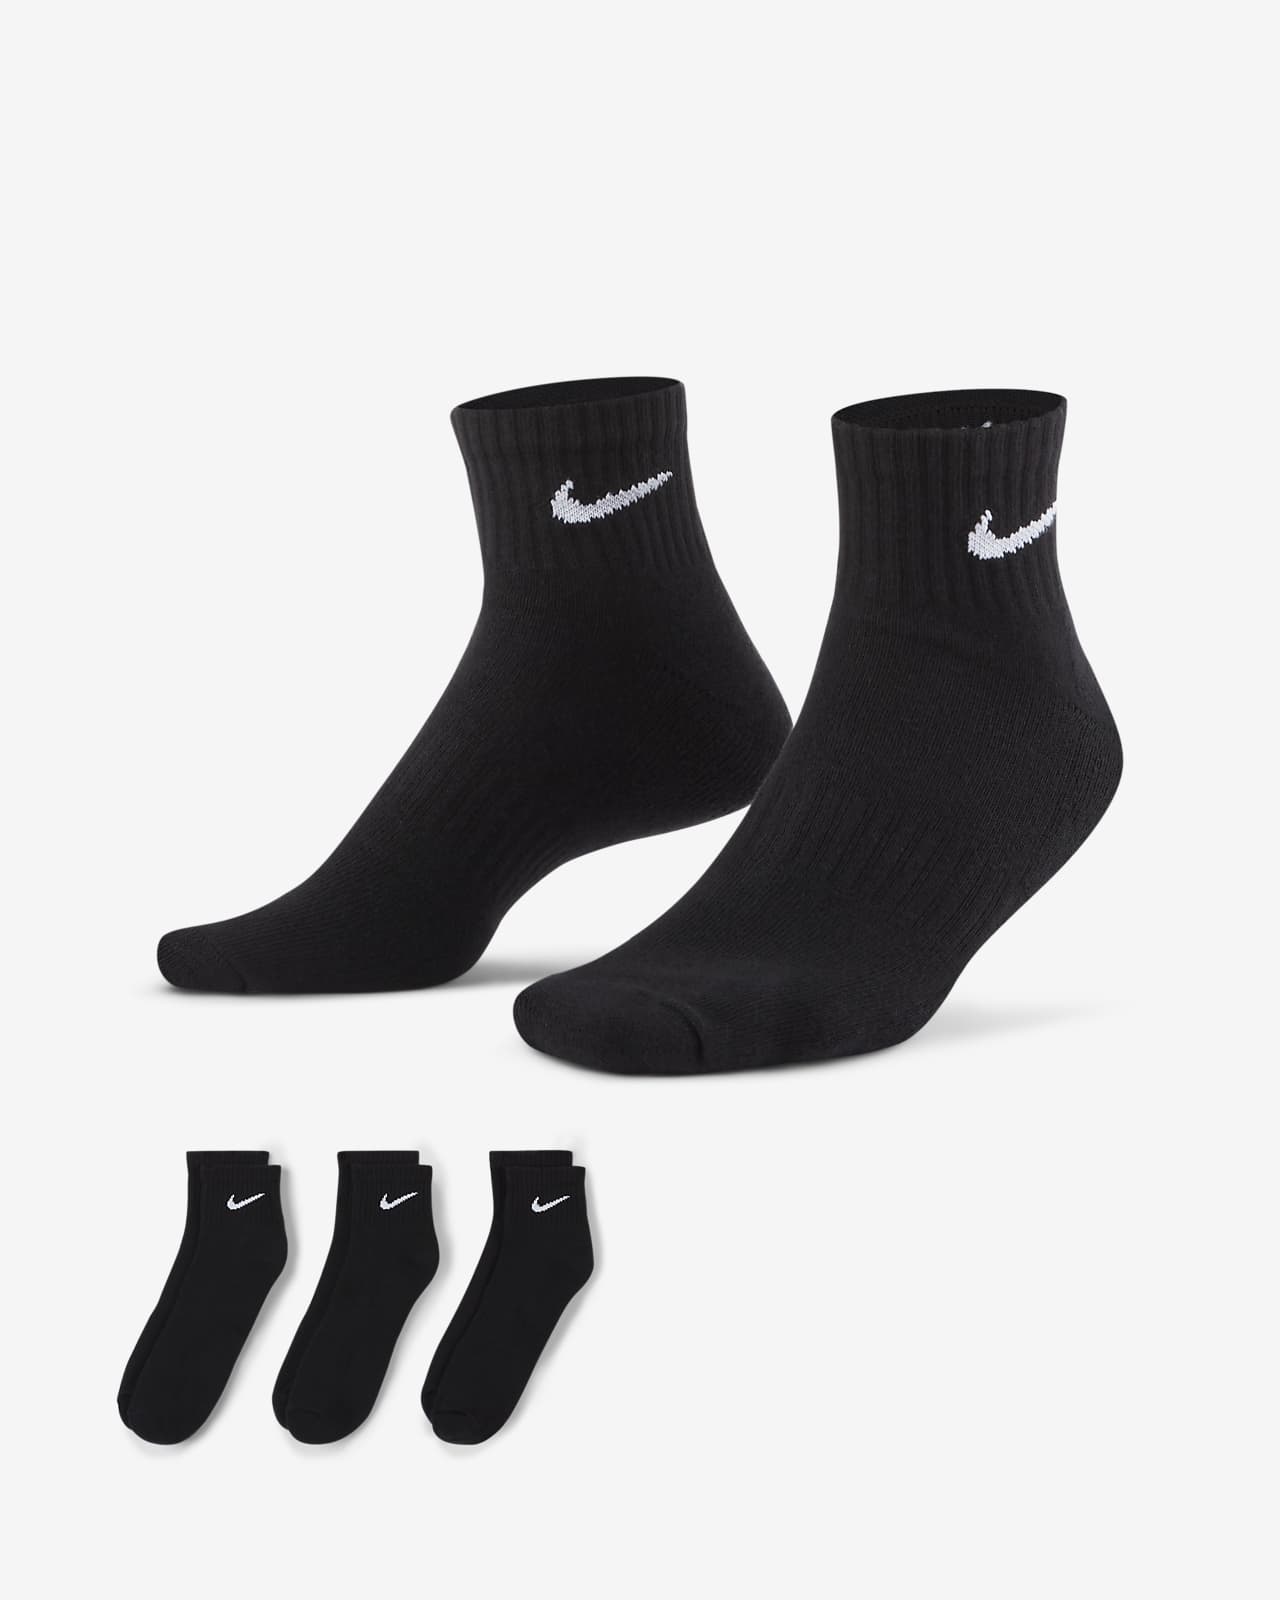 Chaussettes de training Nike Everyday Cushioned (3 paires)